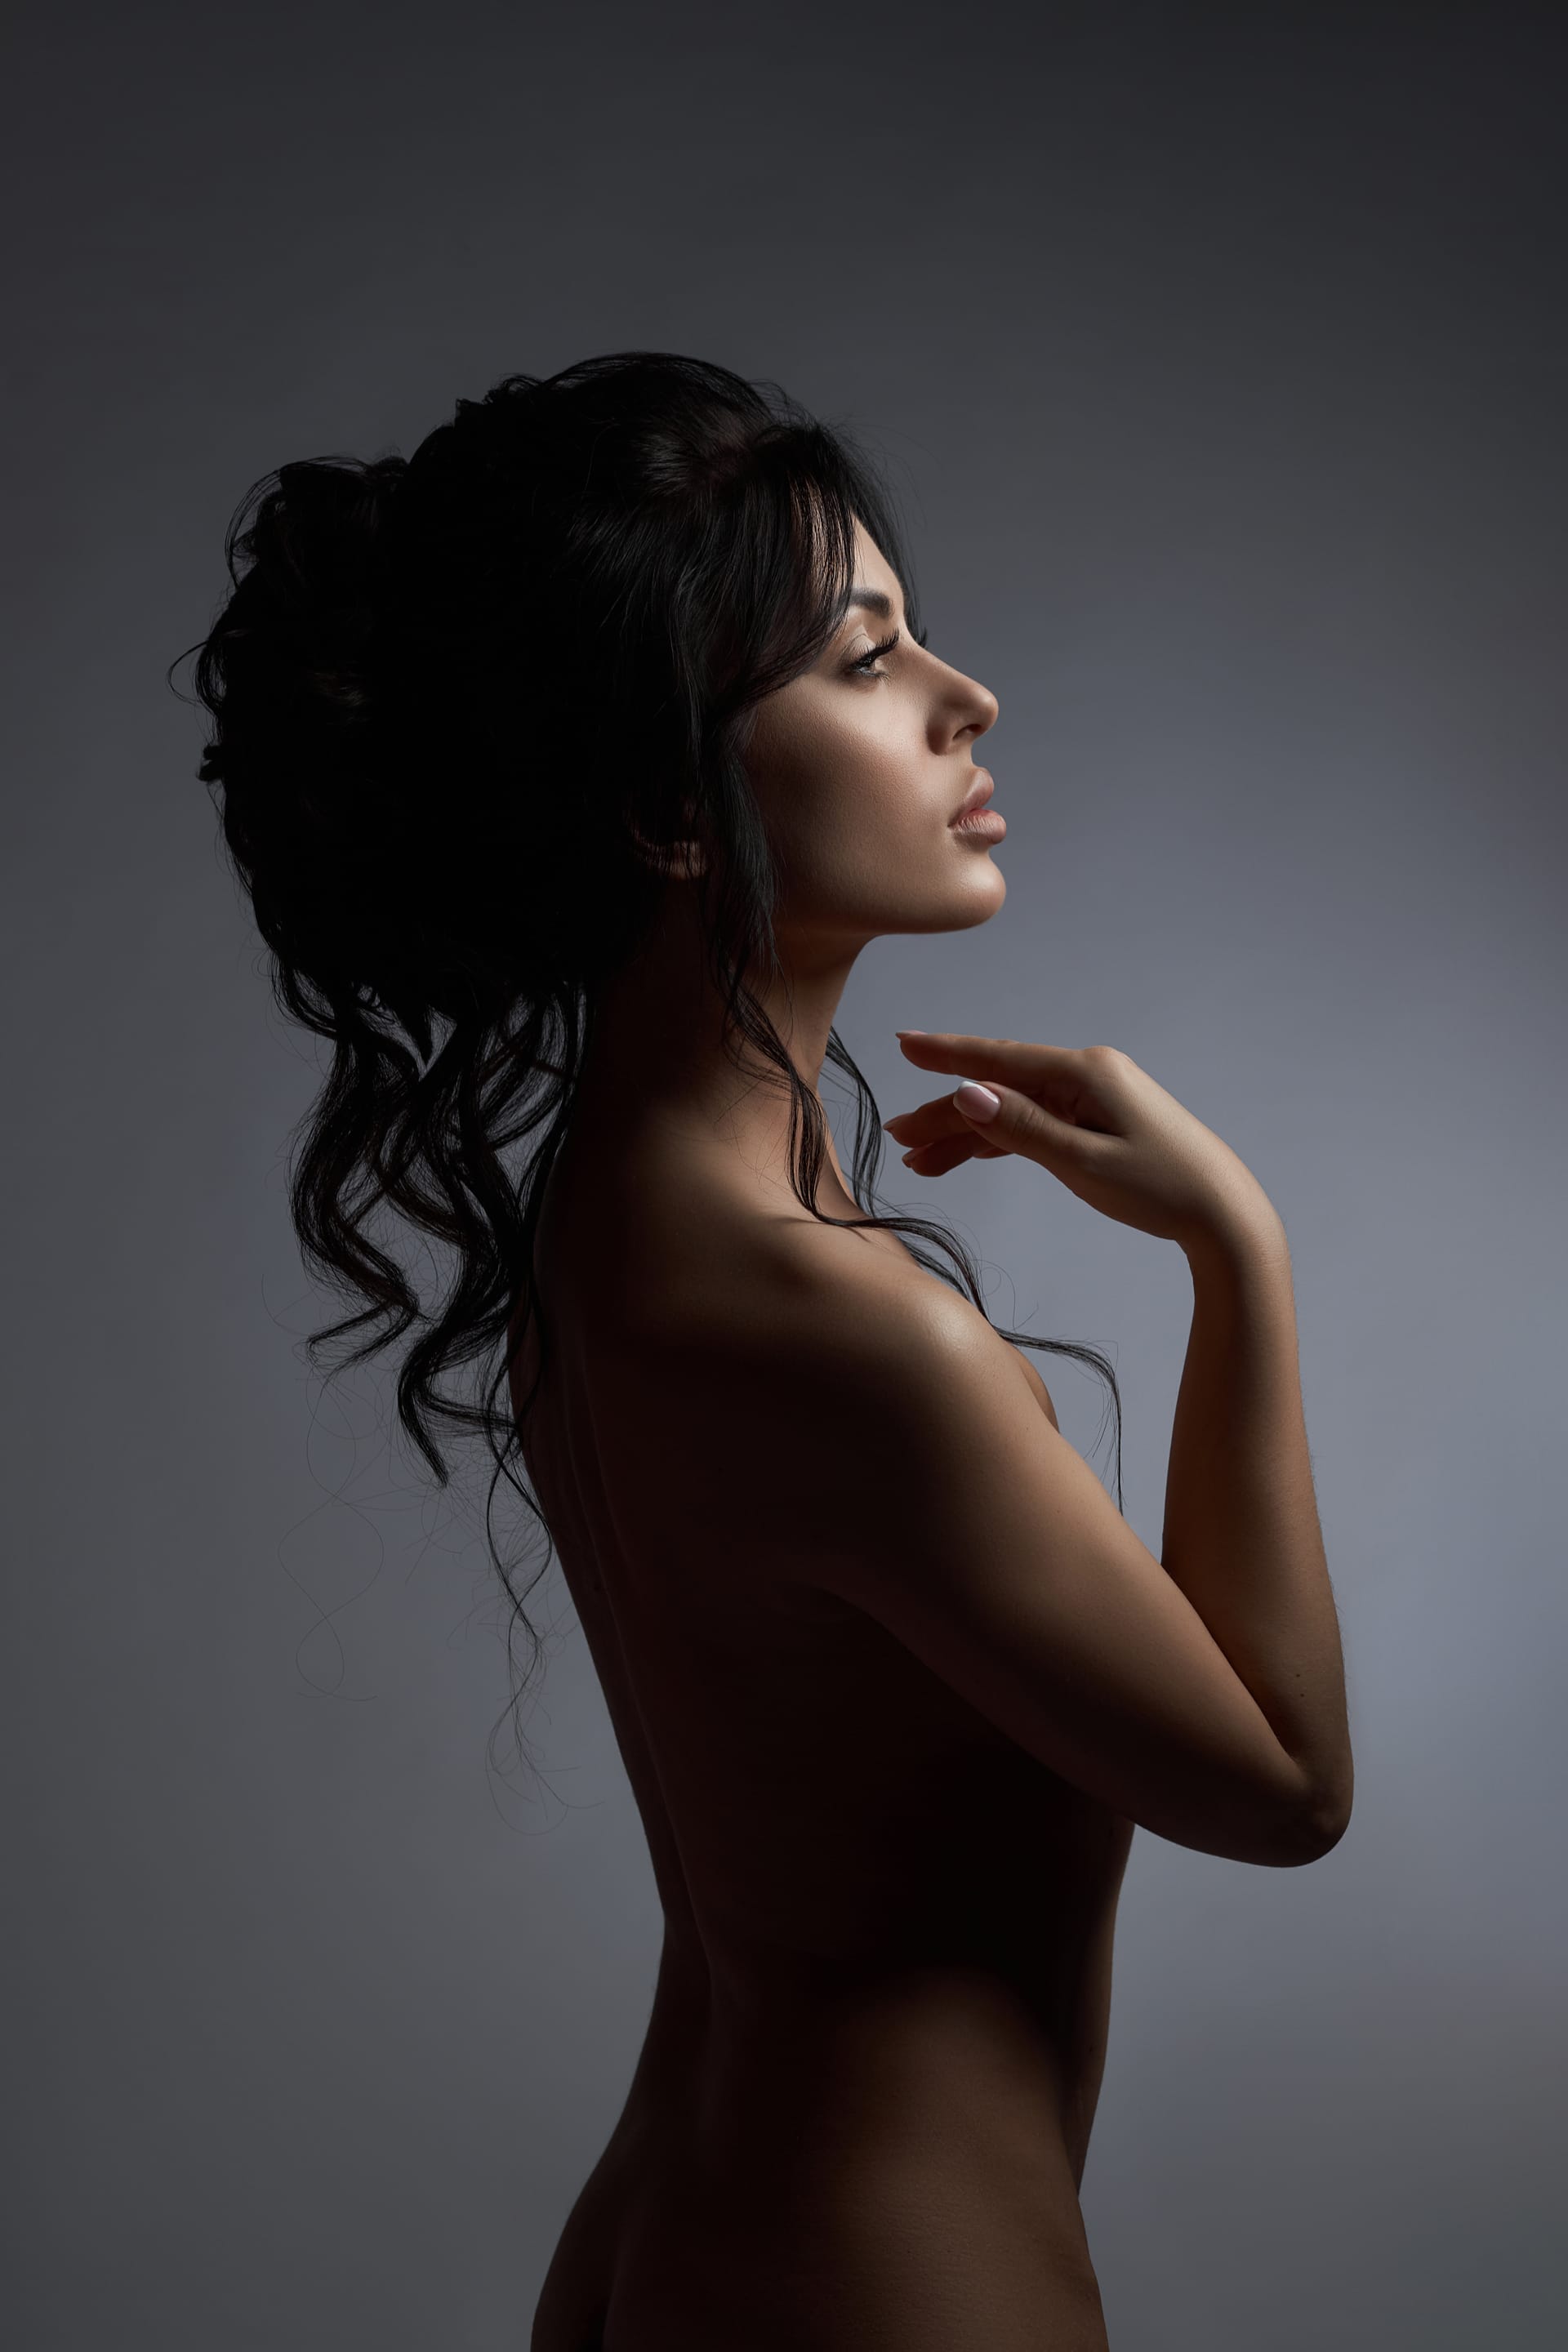 Black hair beautiful makeup long hair with styling romantic woman gray background image